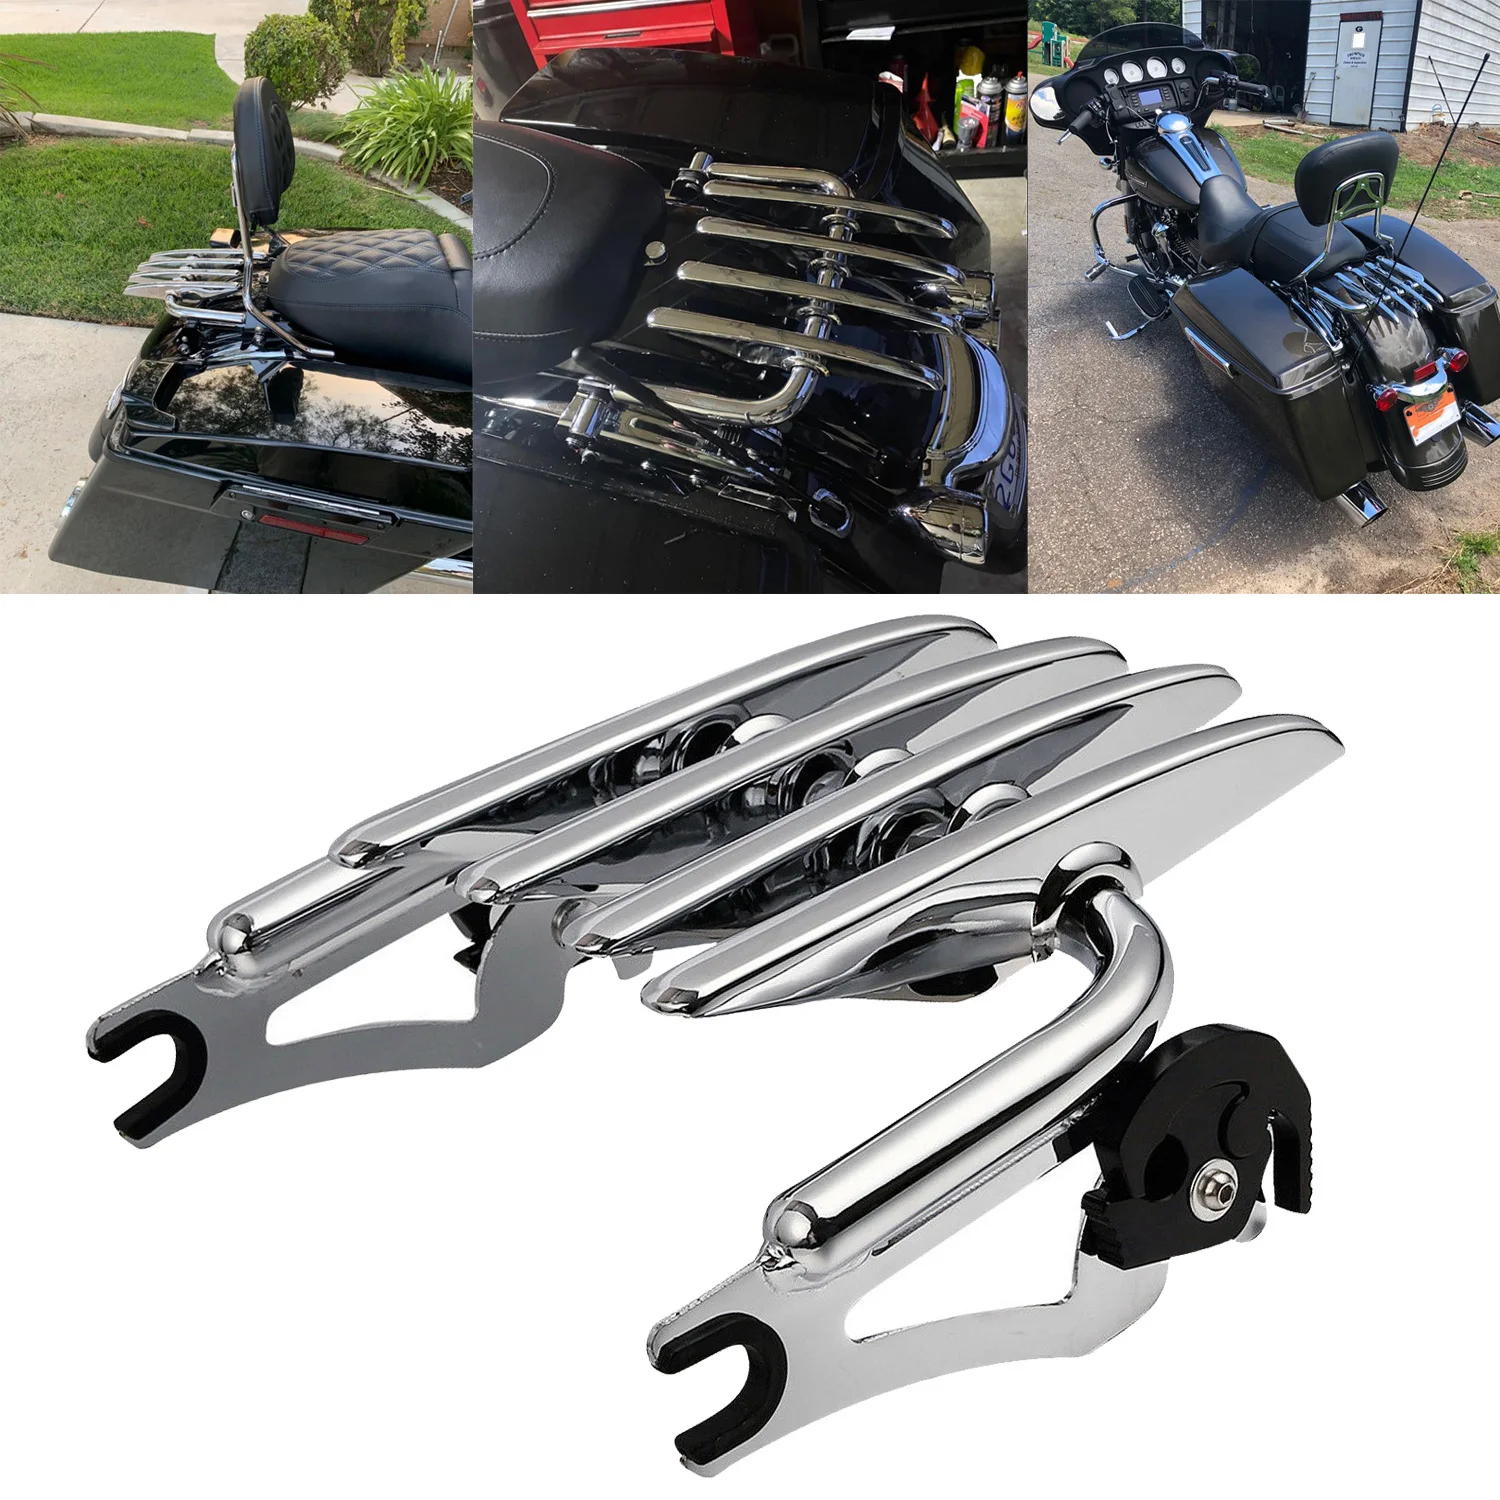 Chrome Detachable Two-Up Stealth Mounting Luggage Rack For Harley Touring Street Electra Glide Road King FLHT FLHX 2009-2023 chrome motorcycles gear shift linkage lever accessories for harley softail road king electra glide fat boy